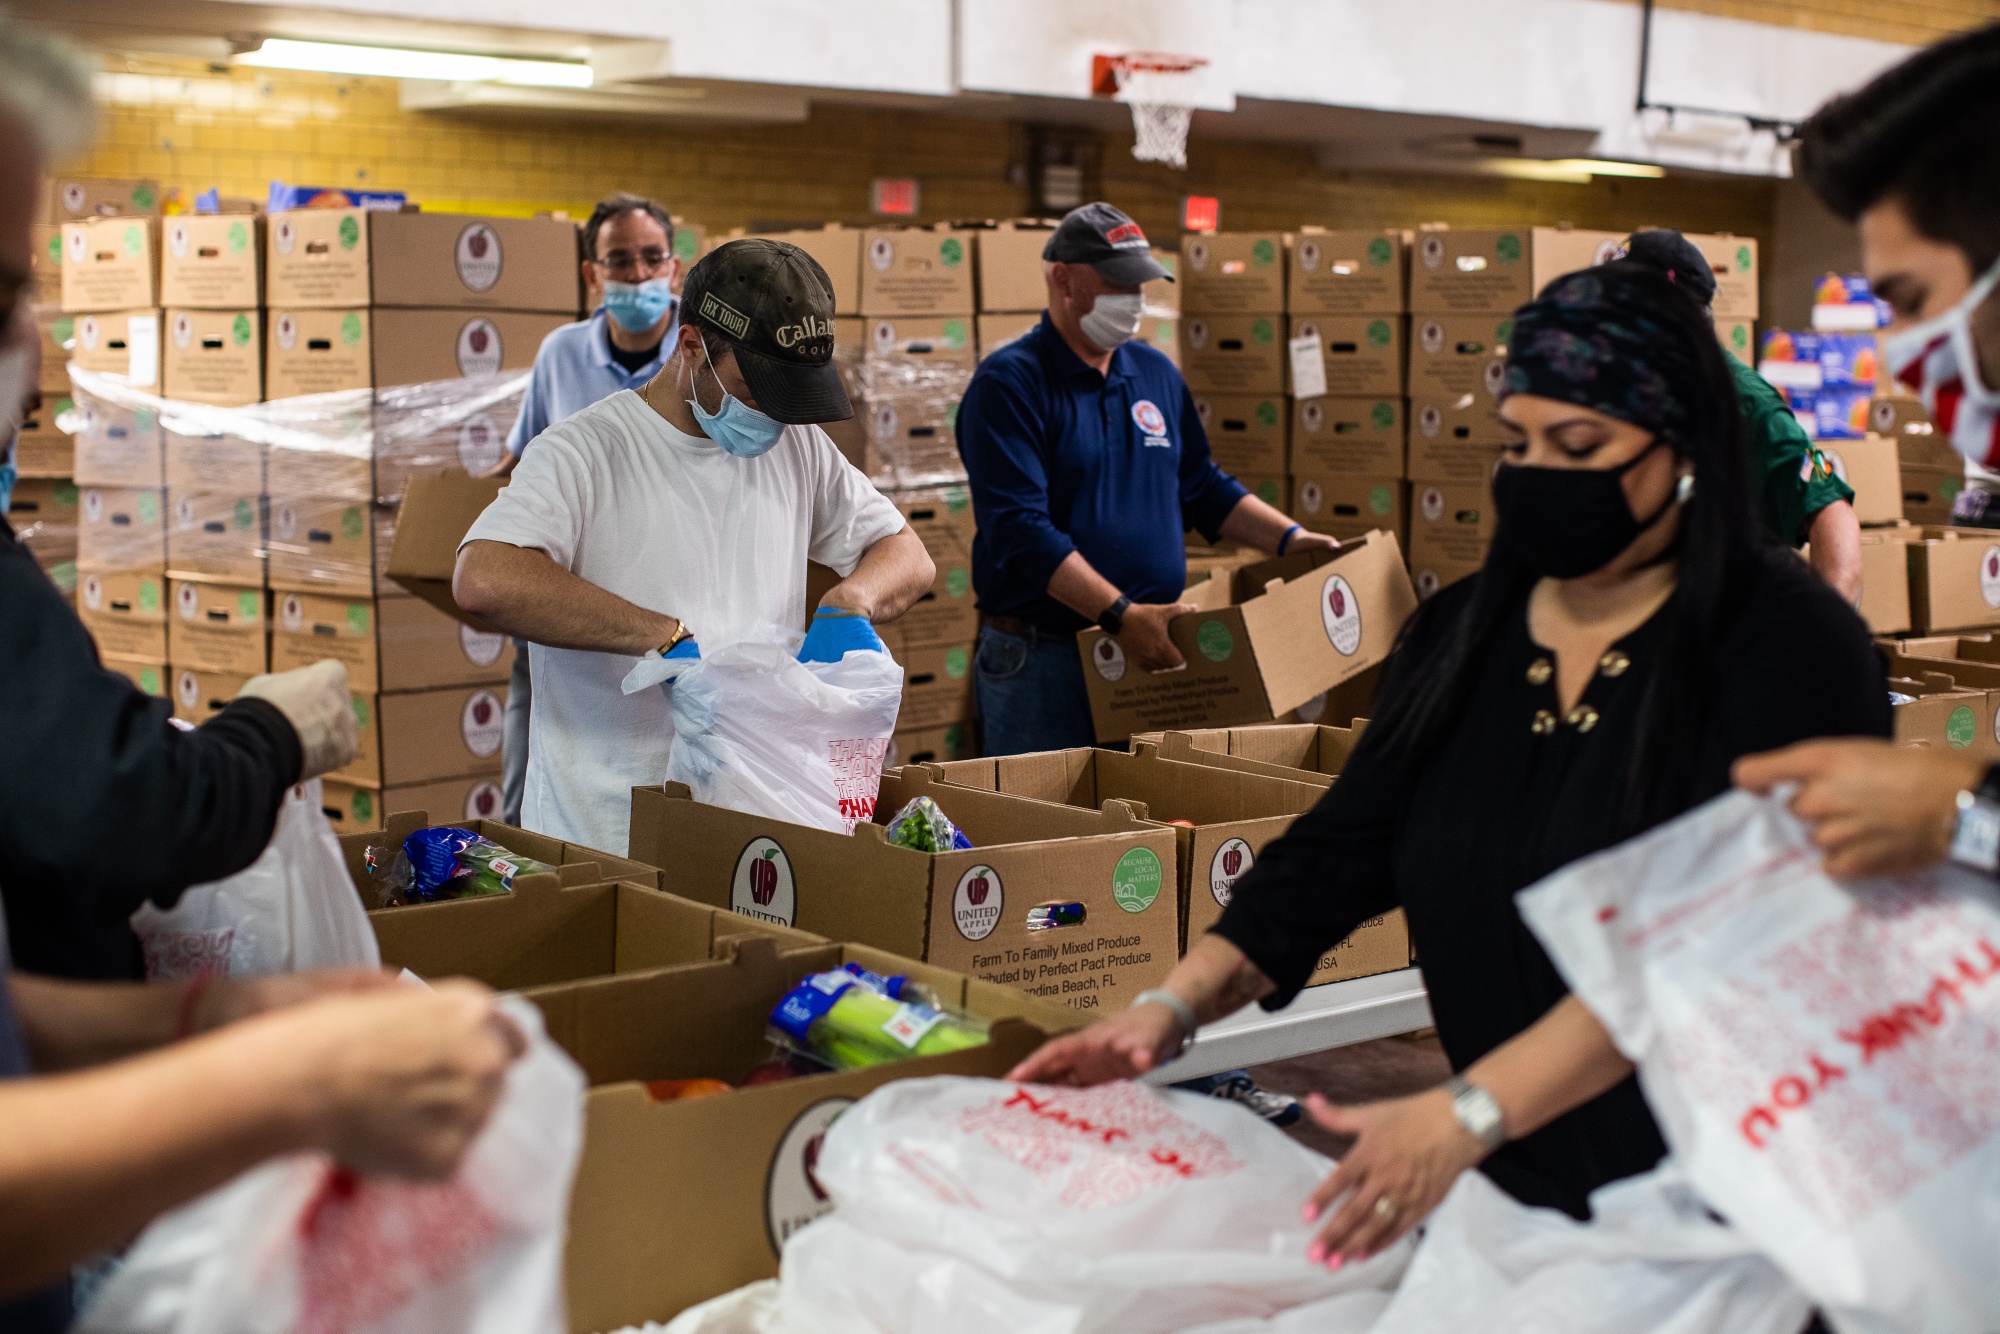 Volunteers bag groceries at a Catholic Charities Brooklyn and Queens pop-up food pantry in Brooklyn, New York, on May 29, 2020.